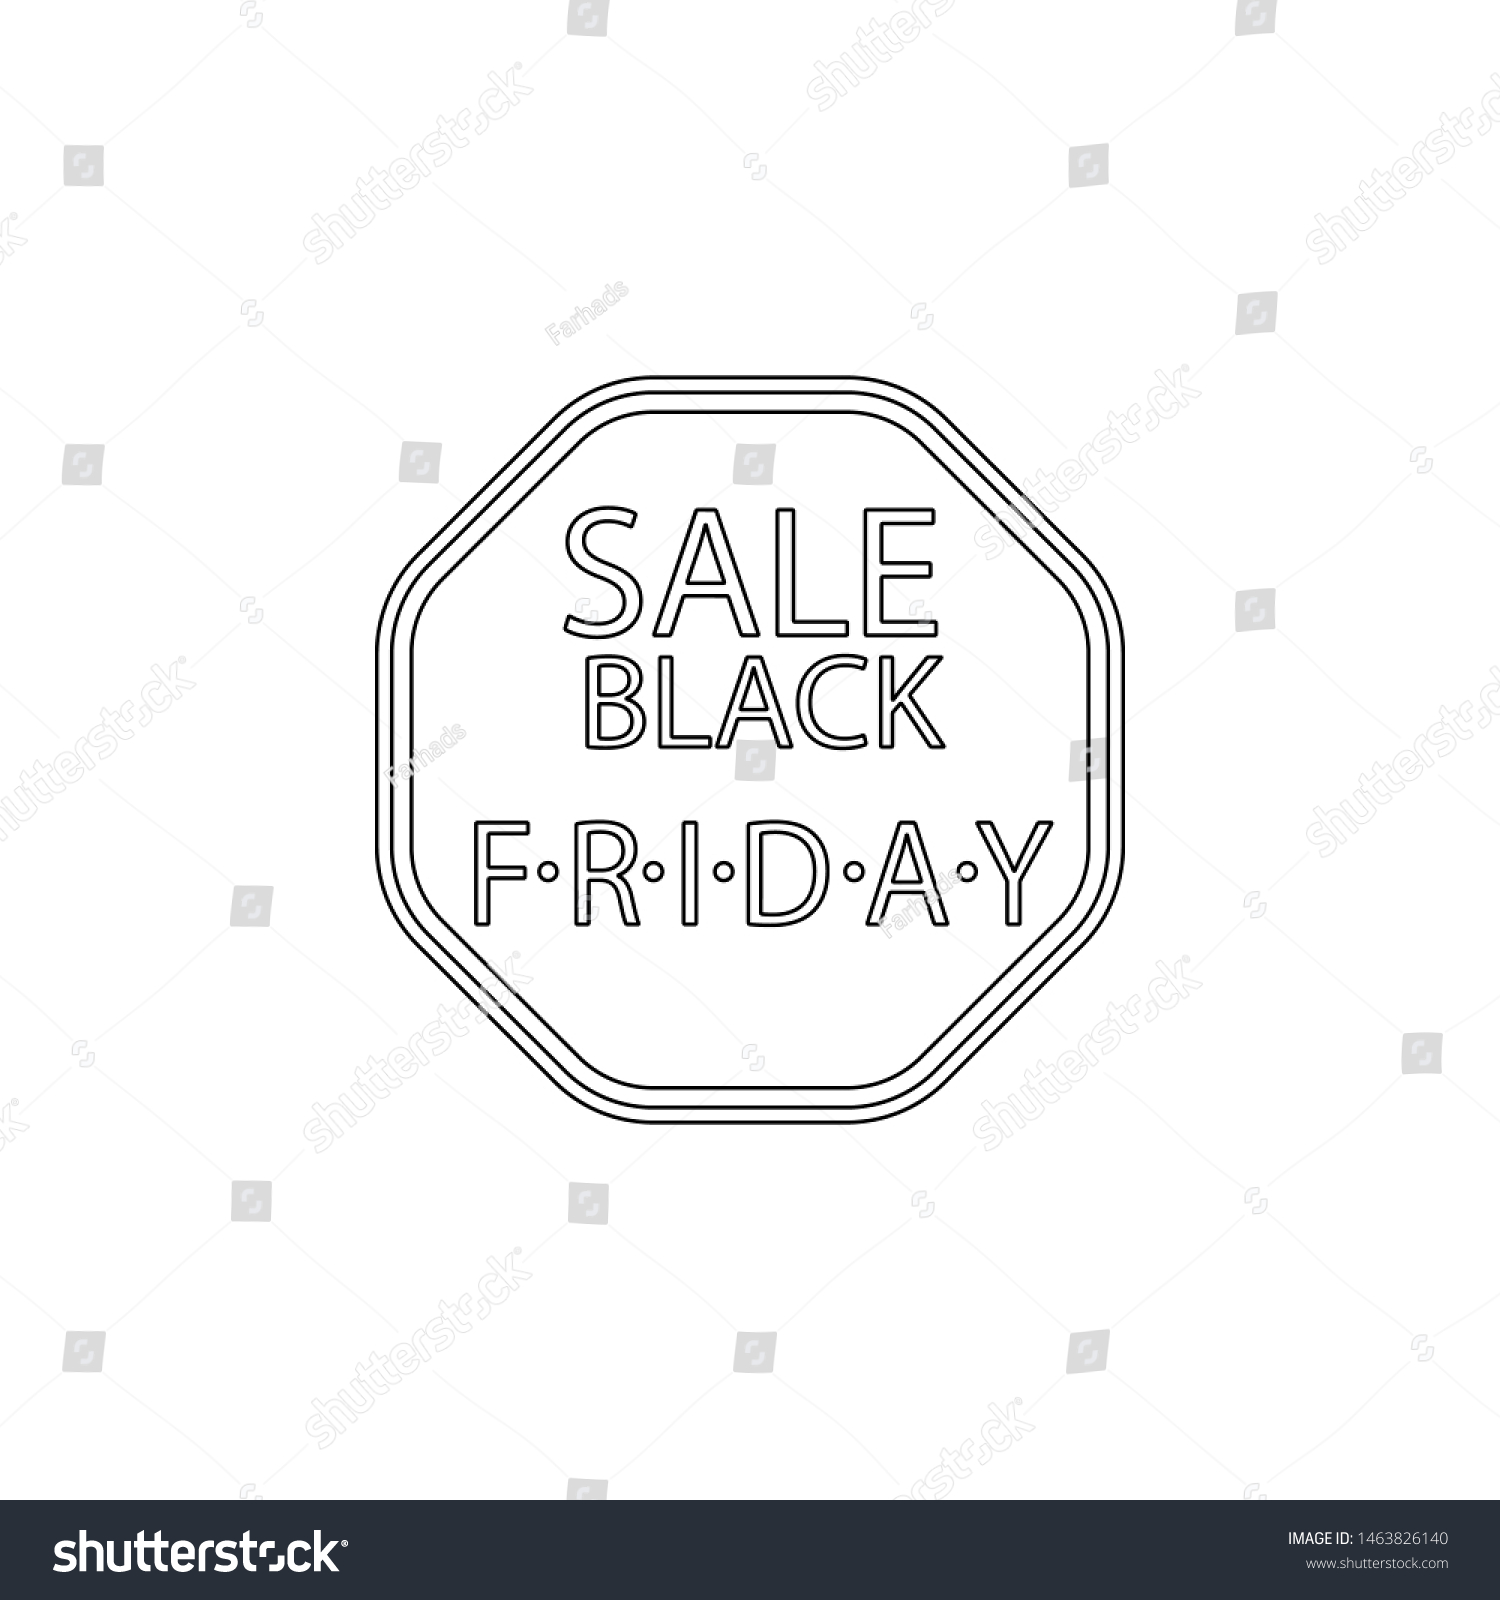 Black Friday Sale Abstract icon. Element of black friday for mobile concept and web apps icon. Outline, thin line icon for website design and development, app development #1463826140